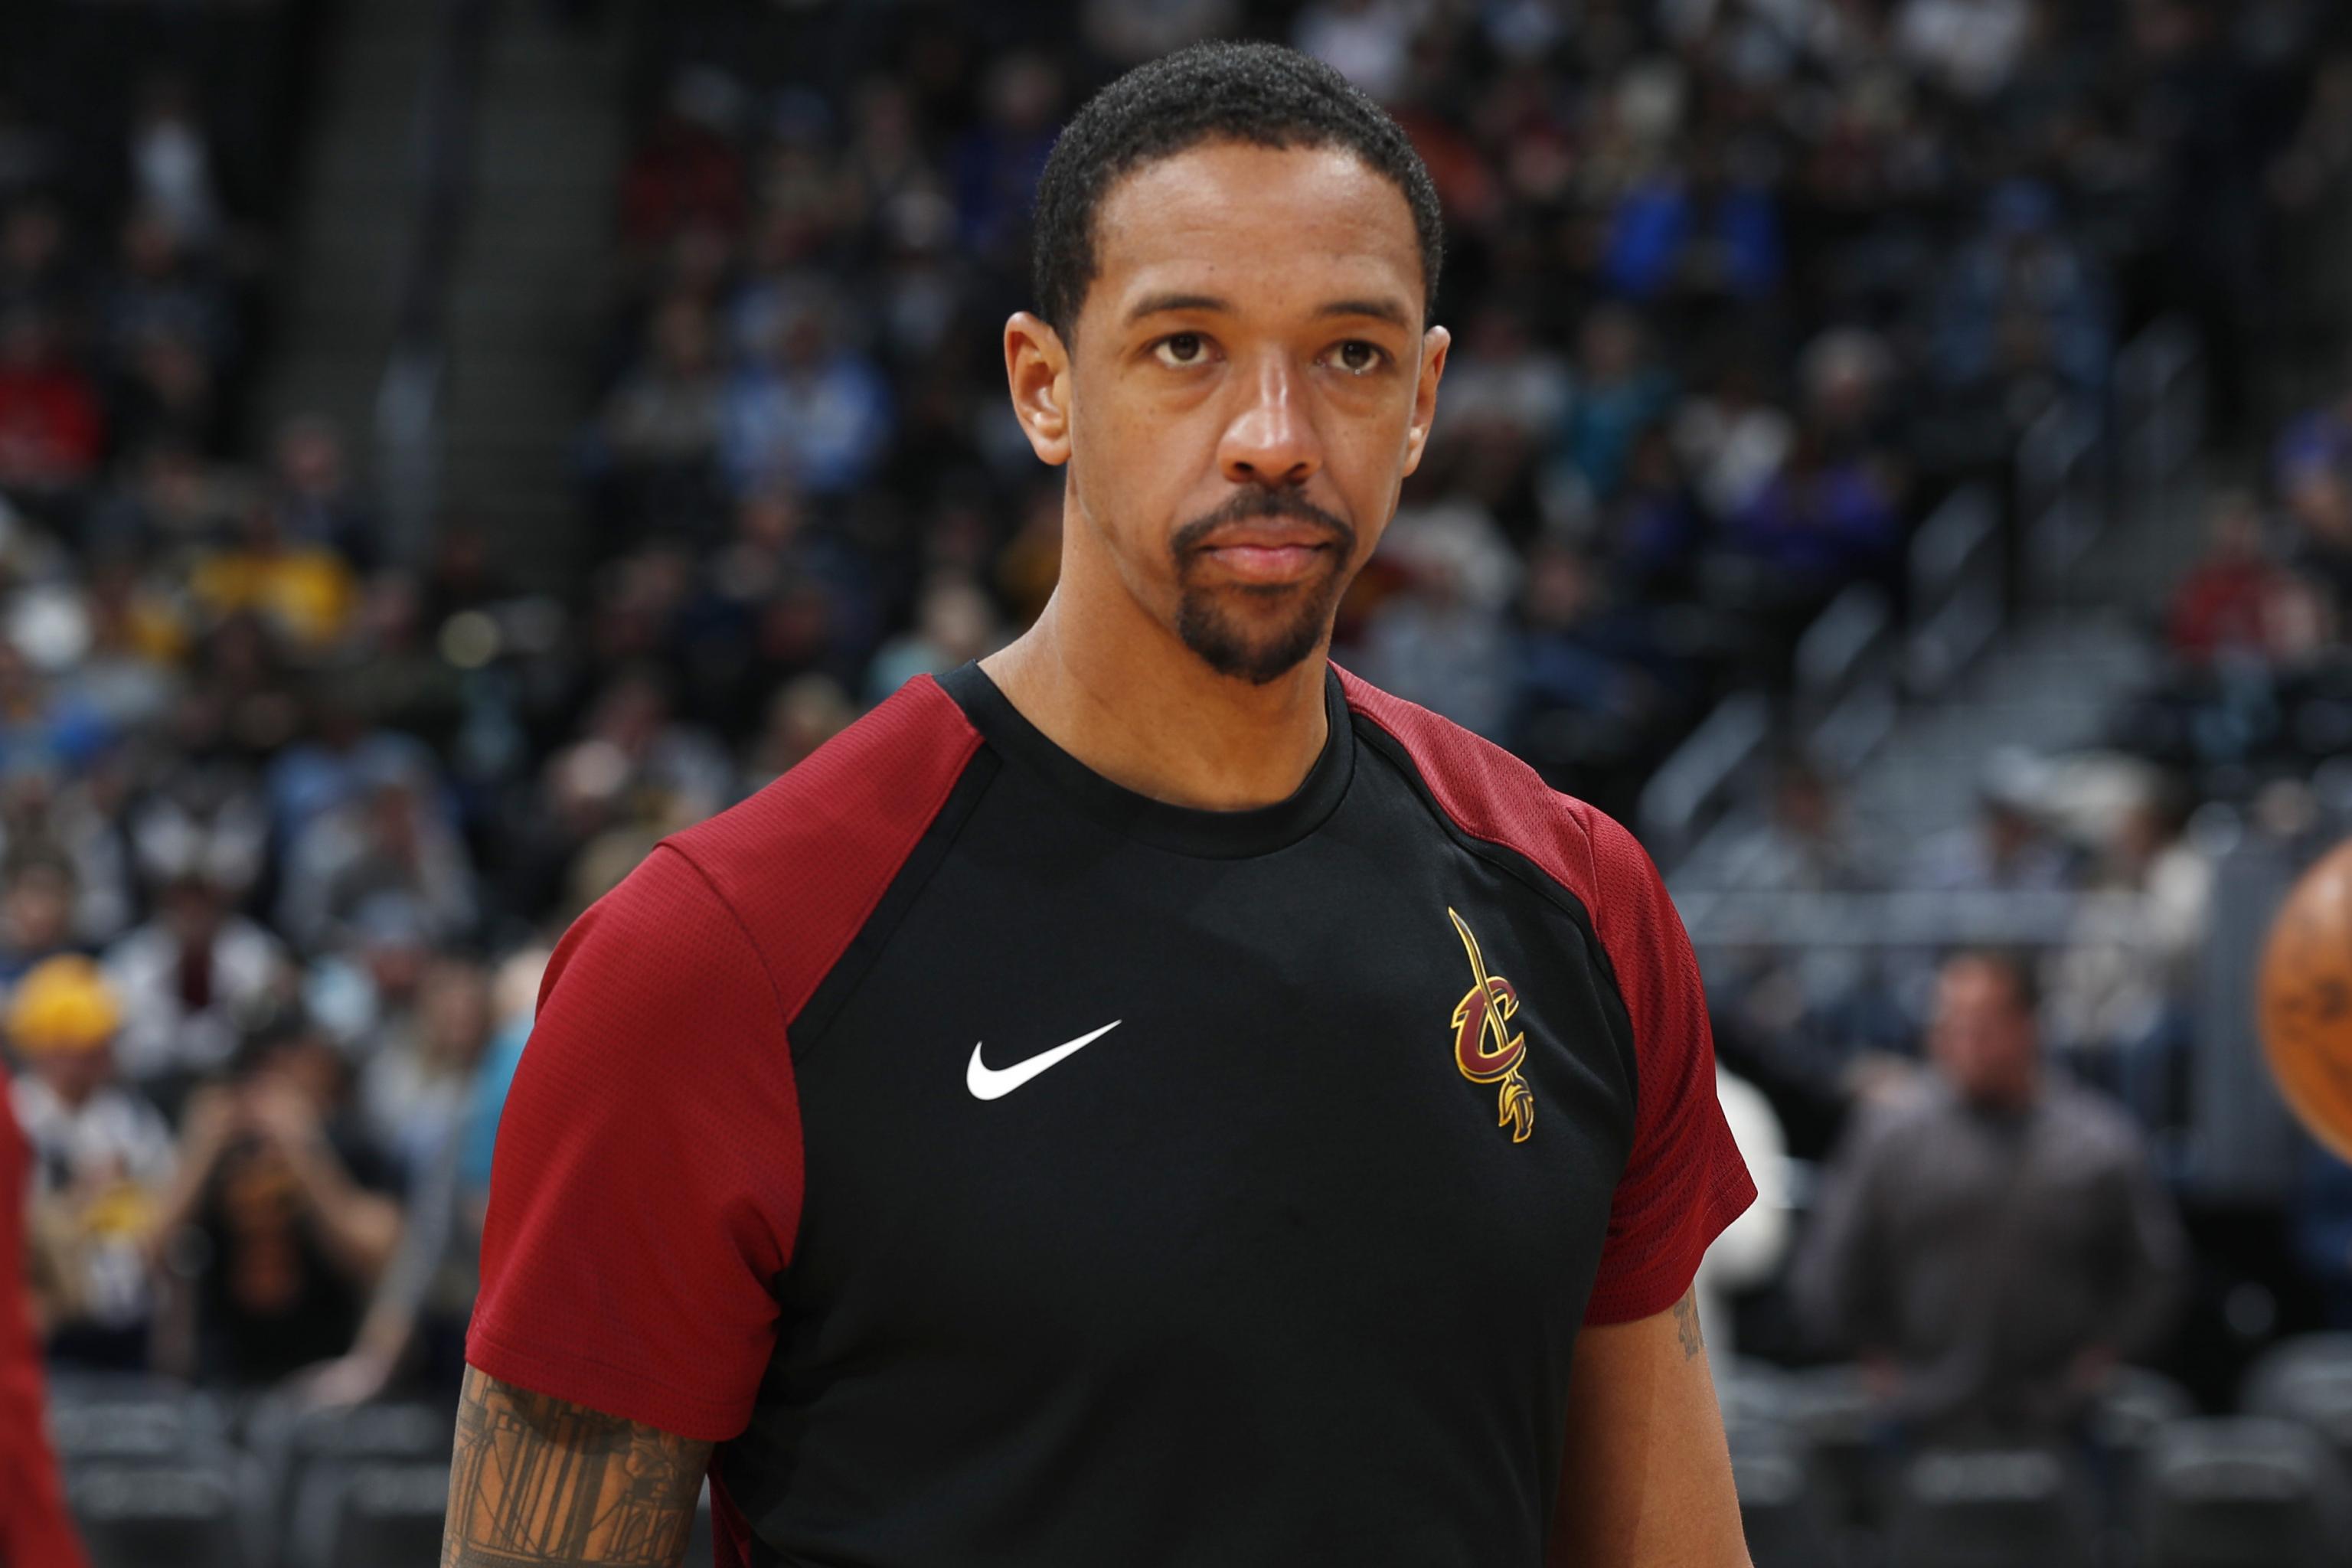 Channing Frye Announces Nba Retirement After Nearly 13 Years In League Bleacher Report Latest News Videos And Highlights